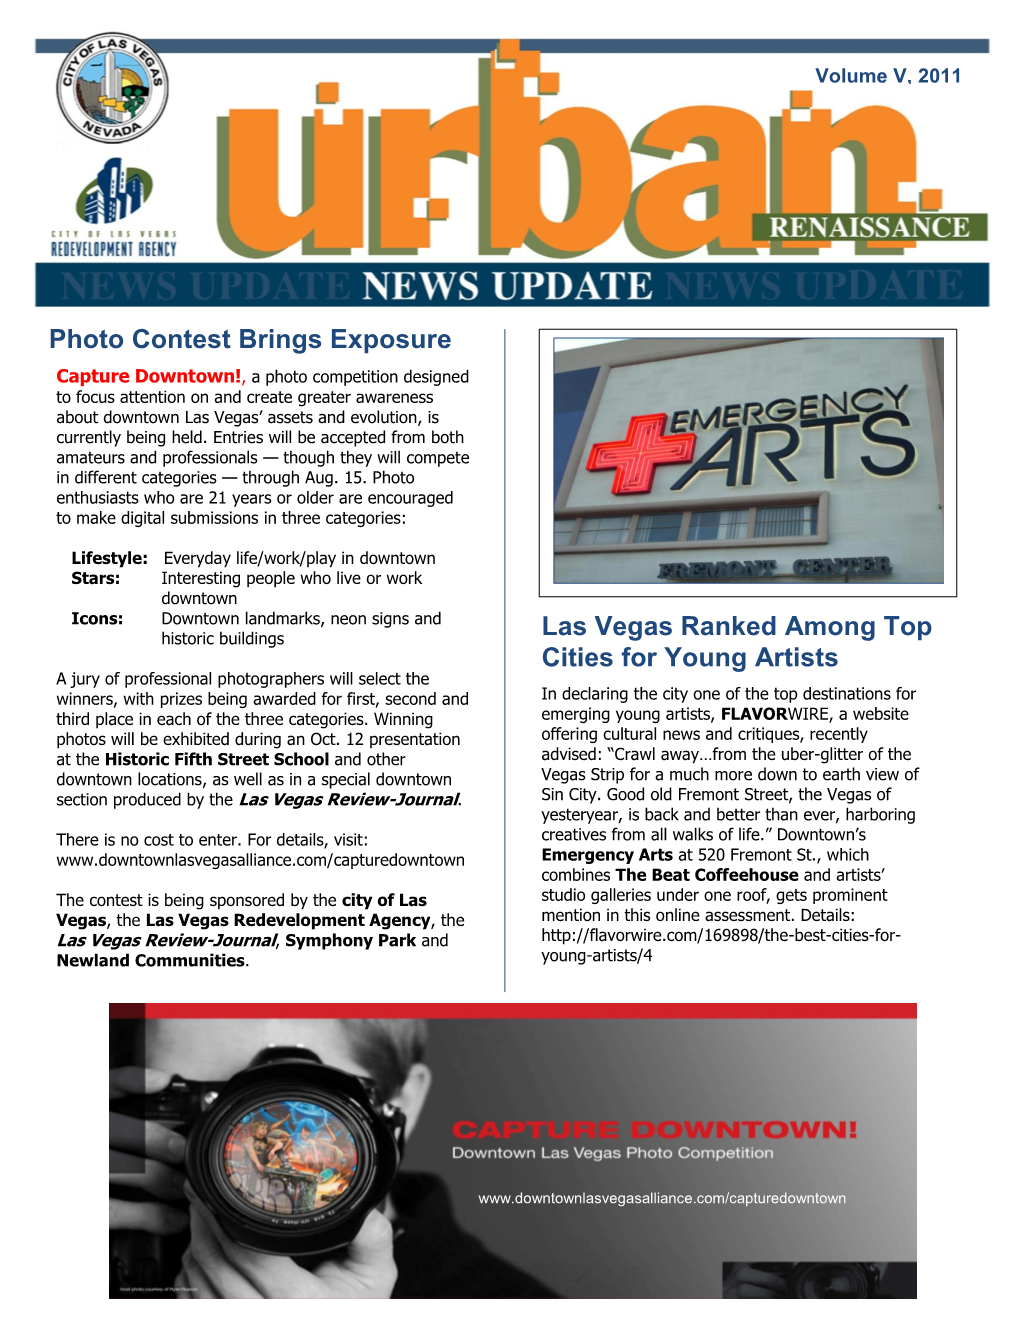 Photo Contest Brings Exposure Las Vegas Ranked Among Top Cities for Young Artists